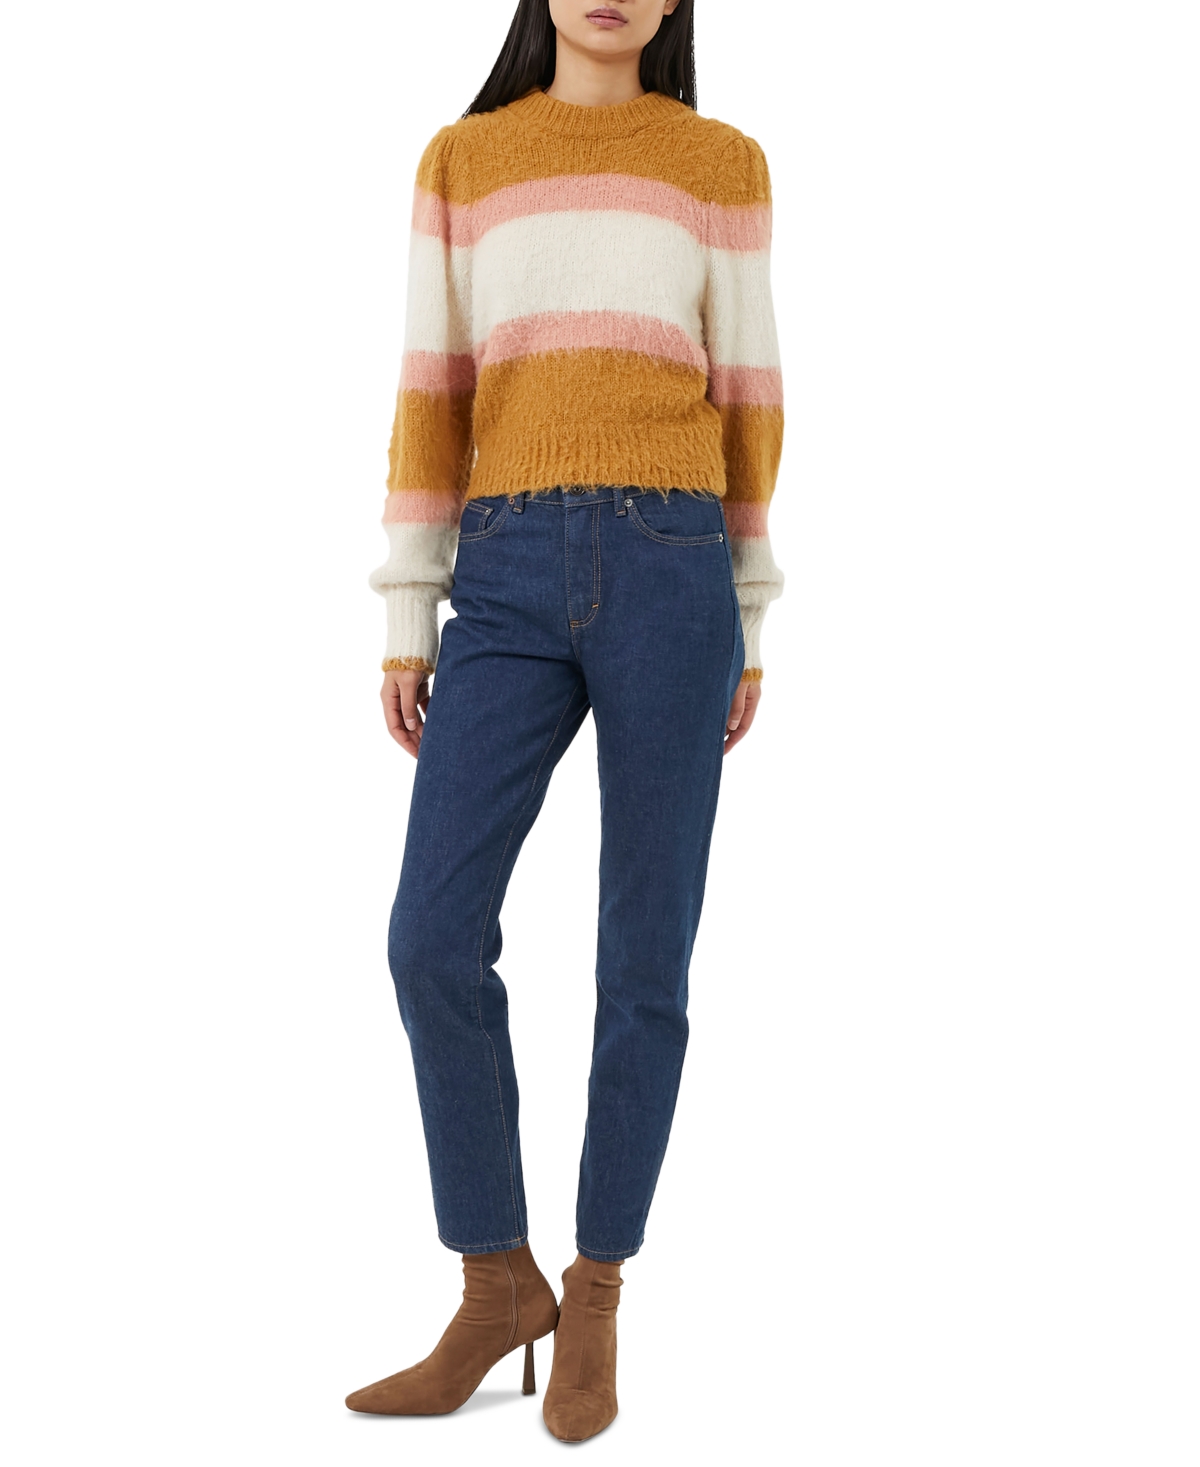 FRENCH CONNECTION WOMEN'S MOLI BRUSHED STRIPED JUMPER SWEATER